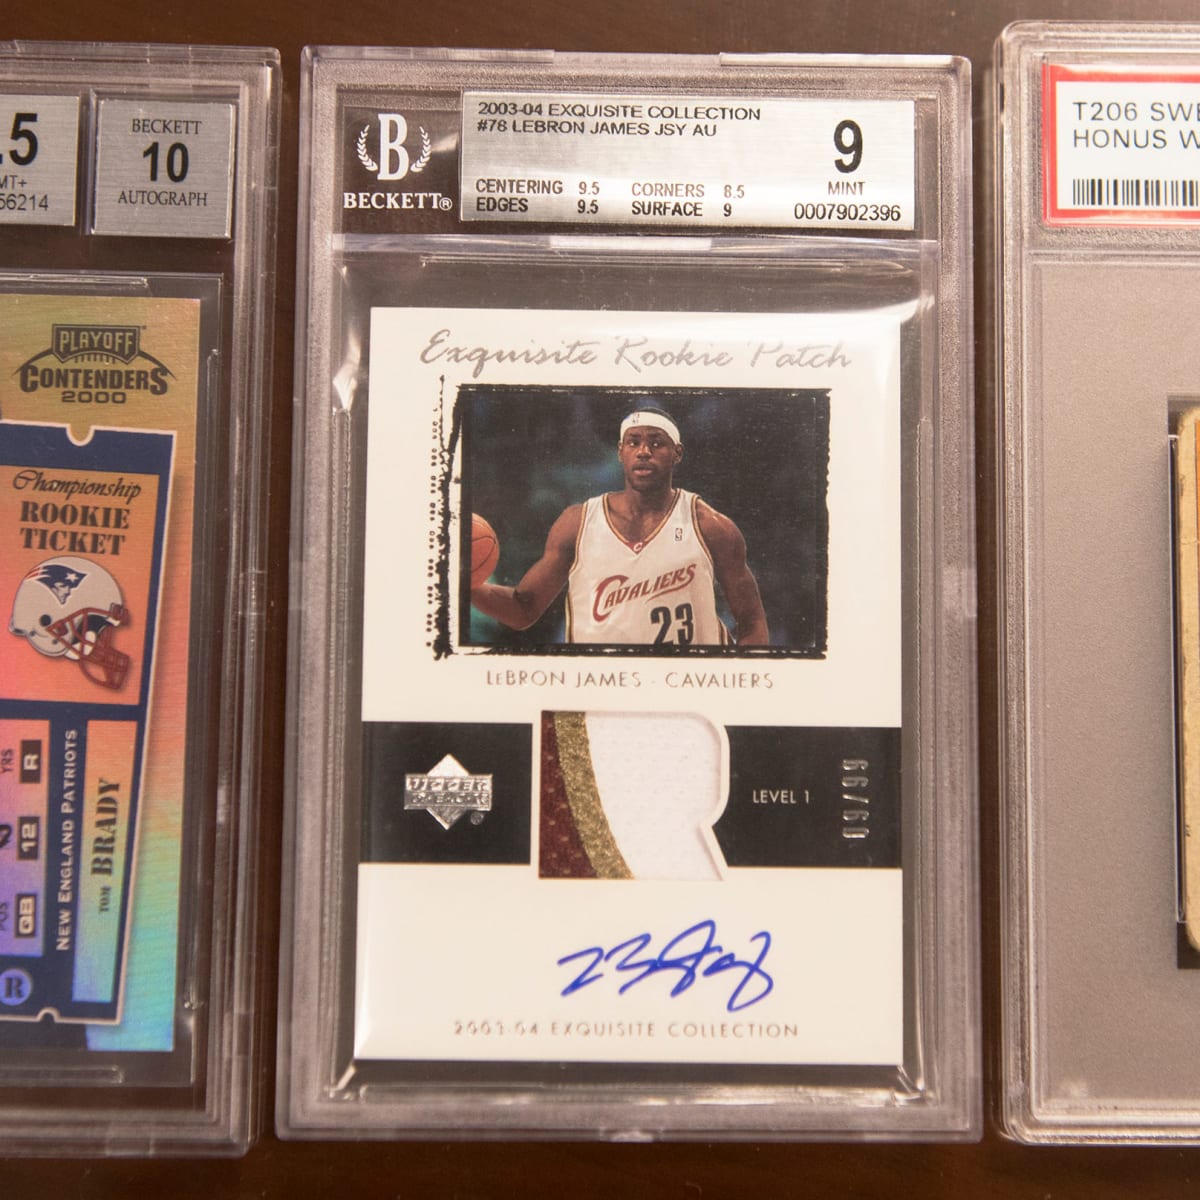 A LeBron James Rookie Card Sold For $5.2 Million, Making It The